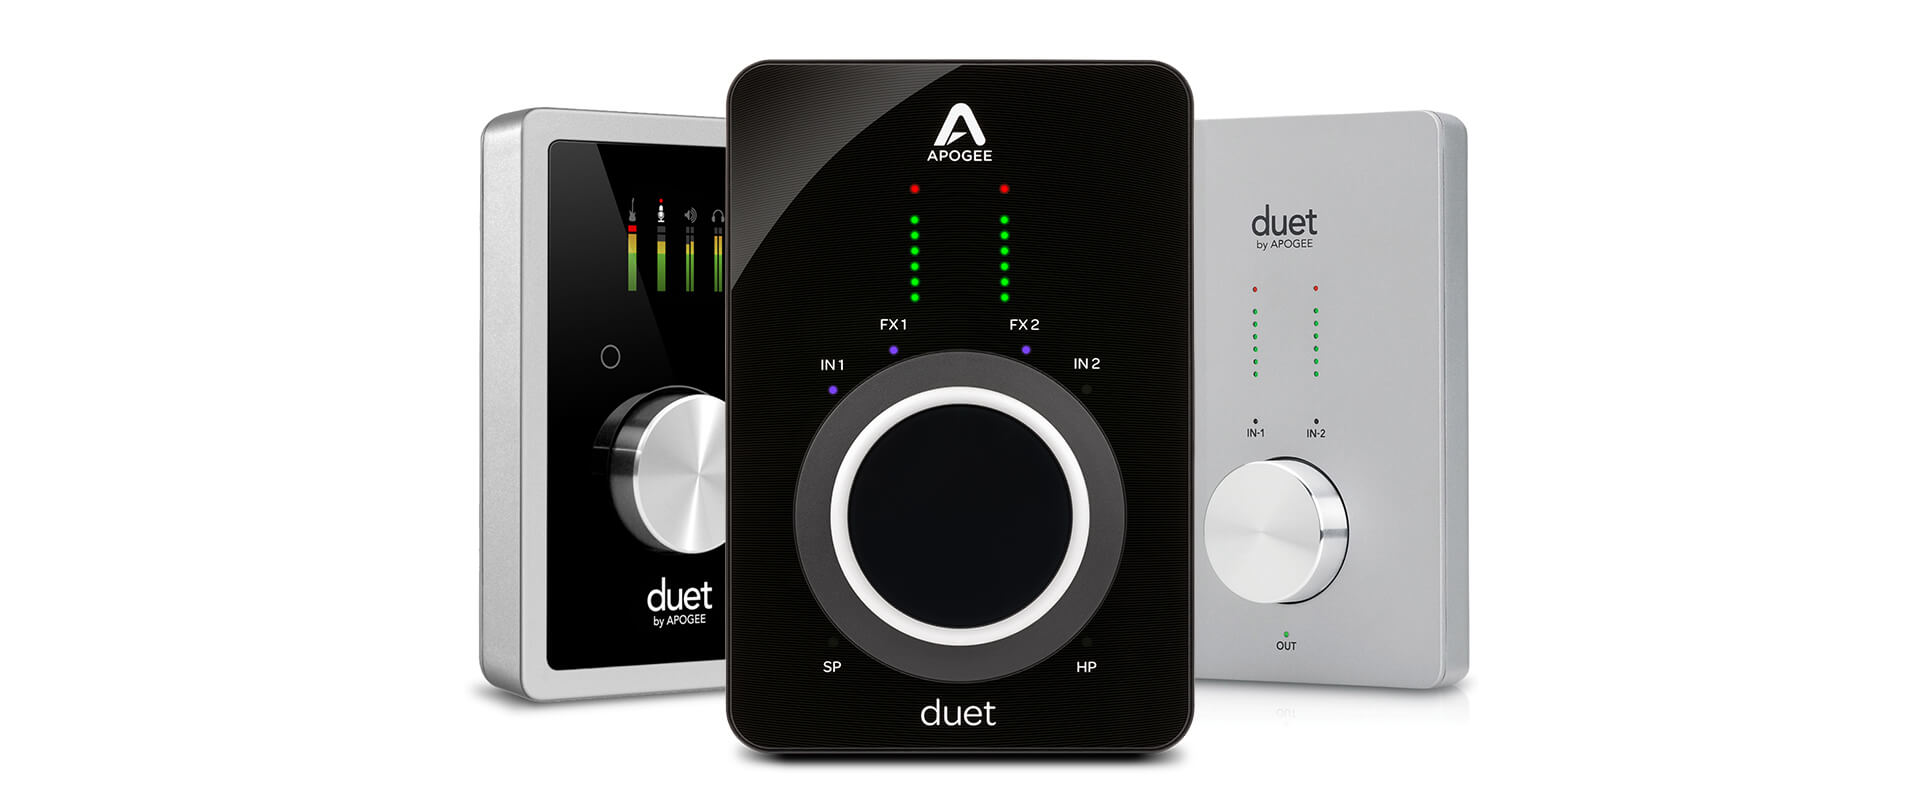 All 3 versions of Apogee Duet's that have been released since 2007